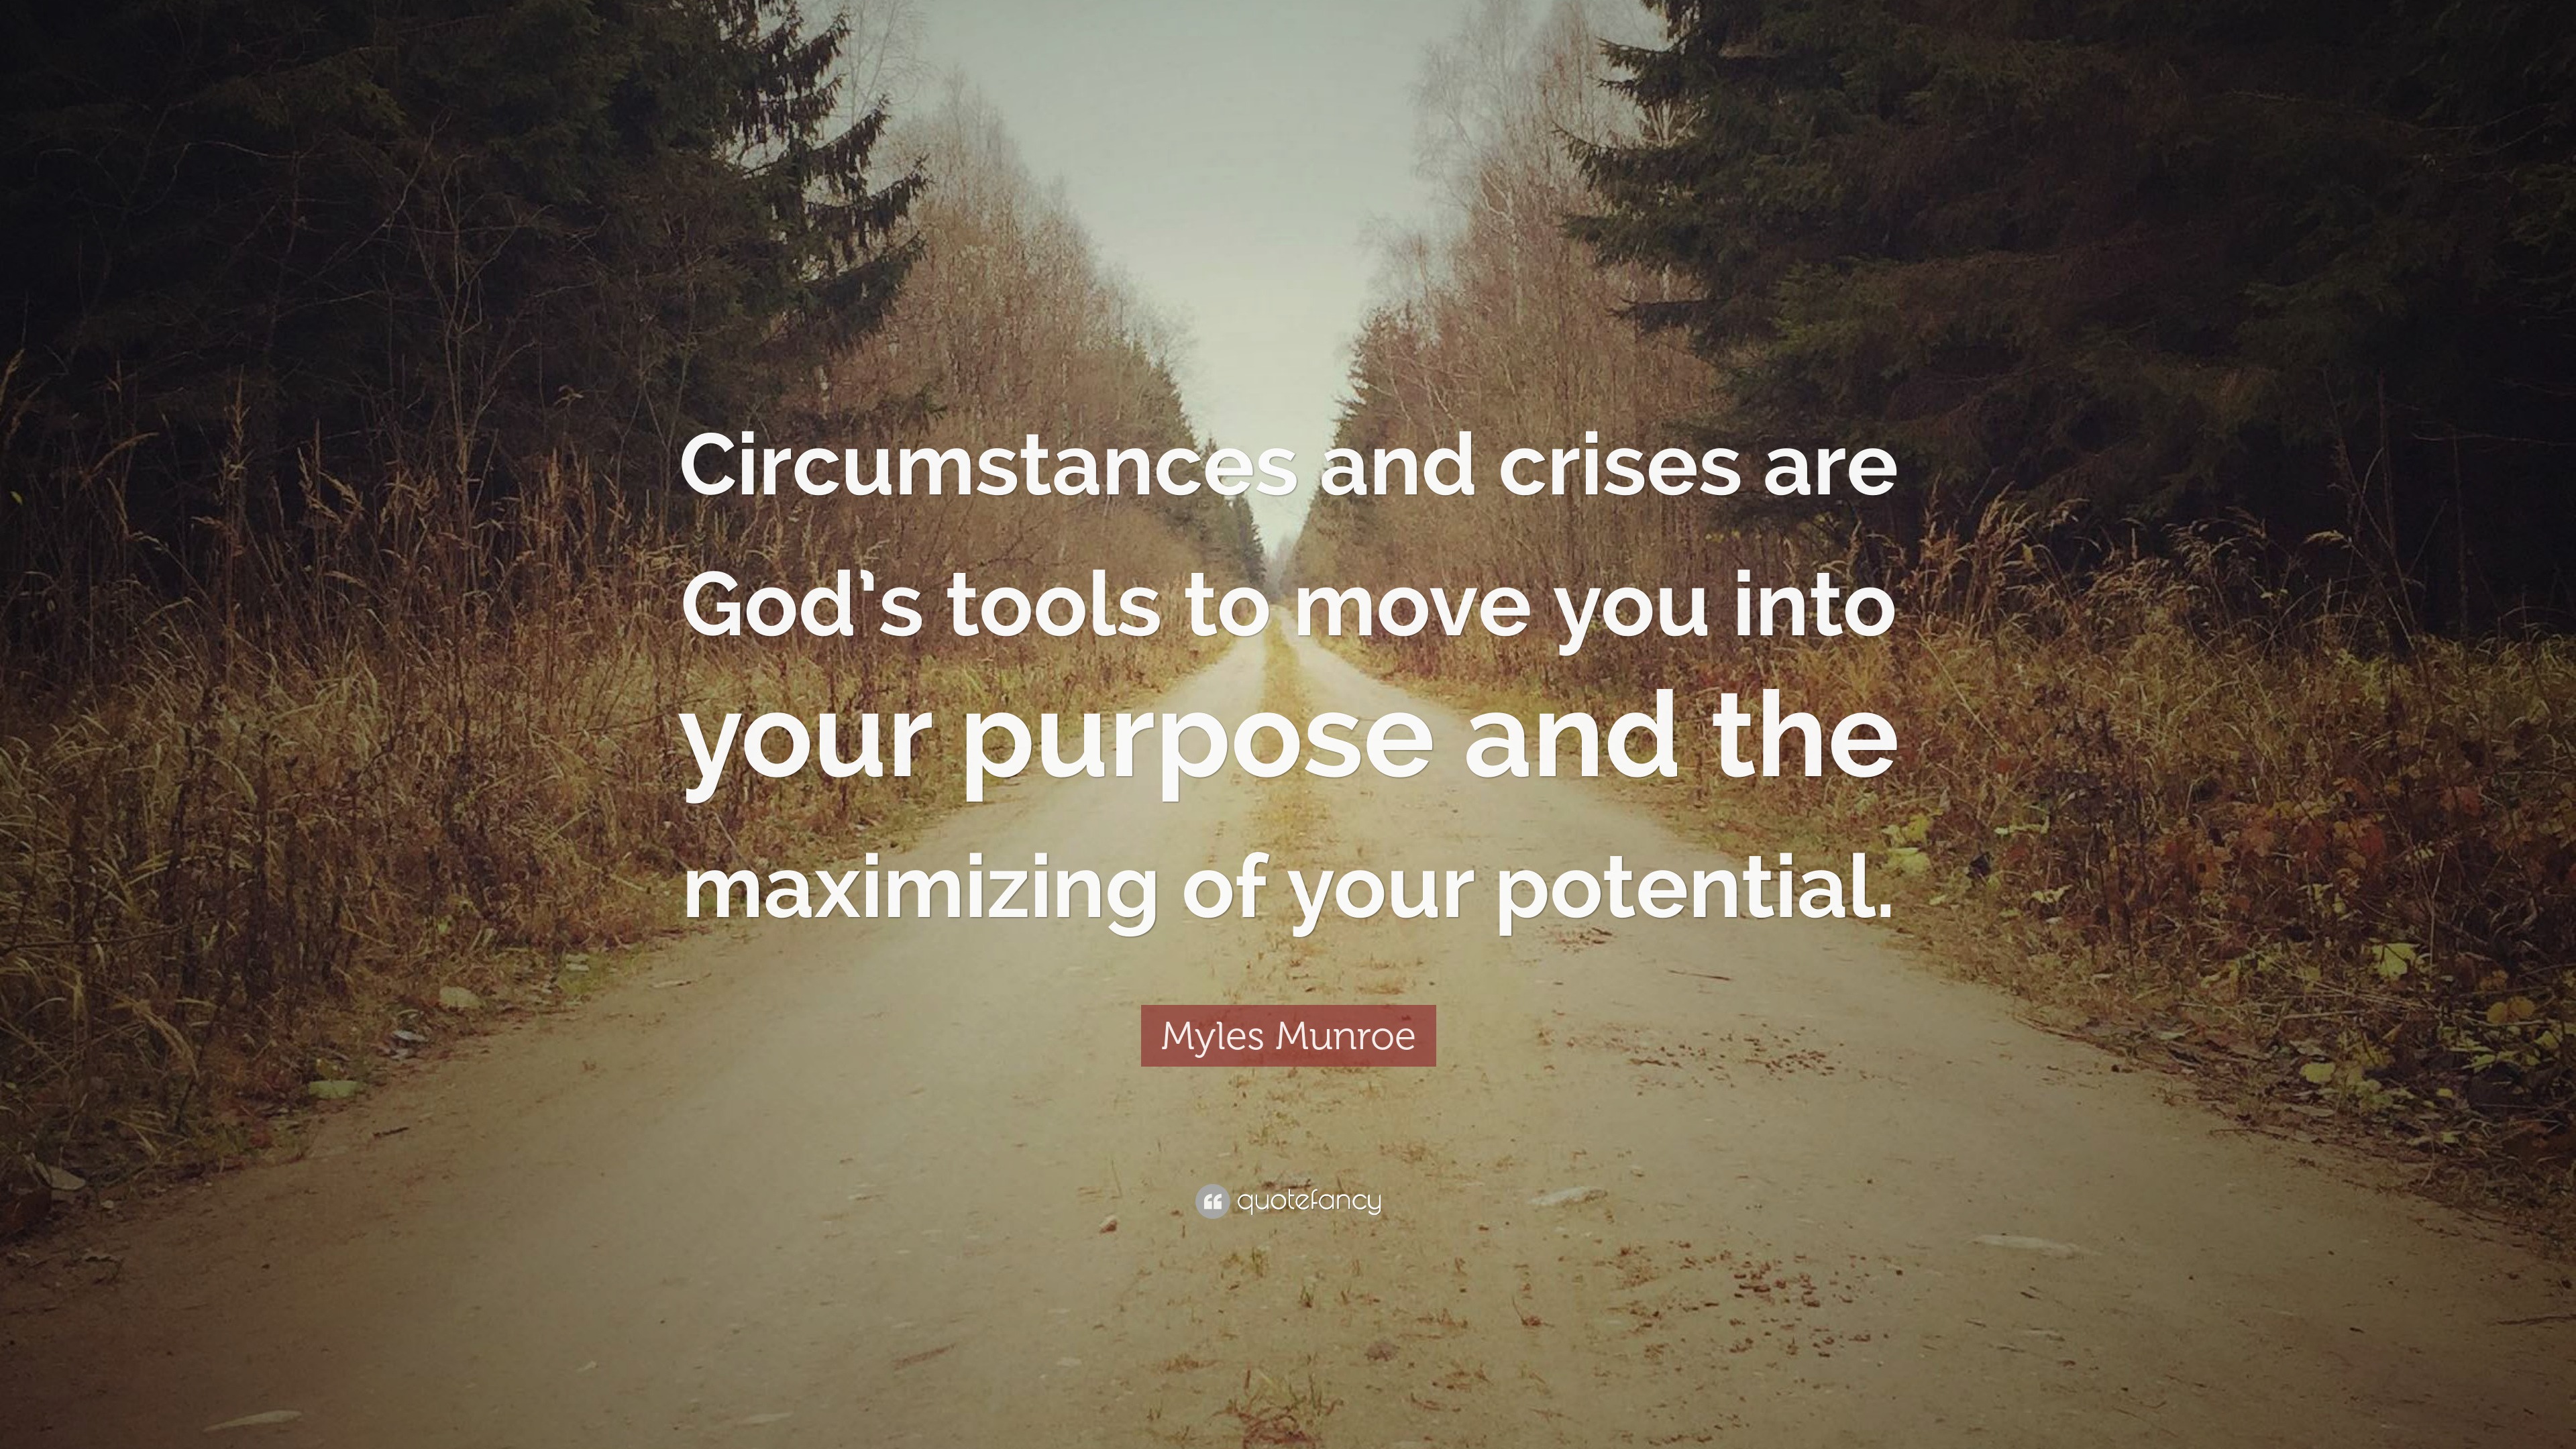 Myles Munroe Quote: “Circumstances and crises are God’s tools to move